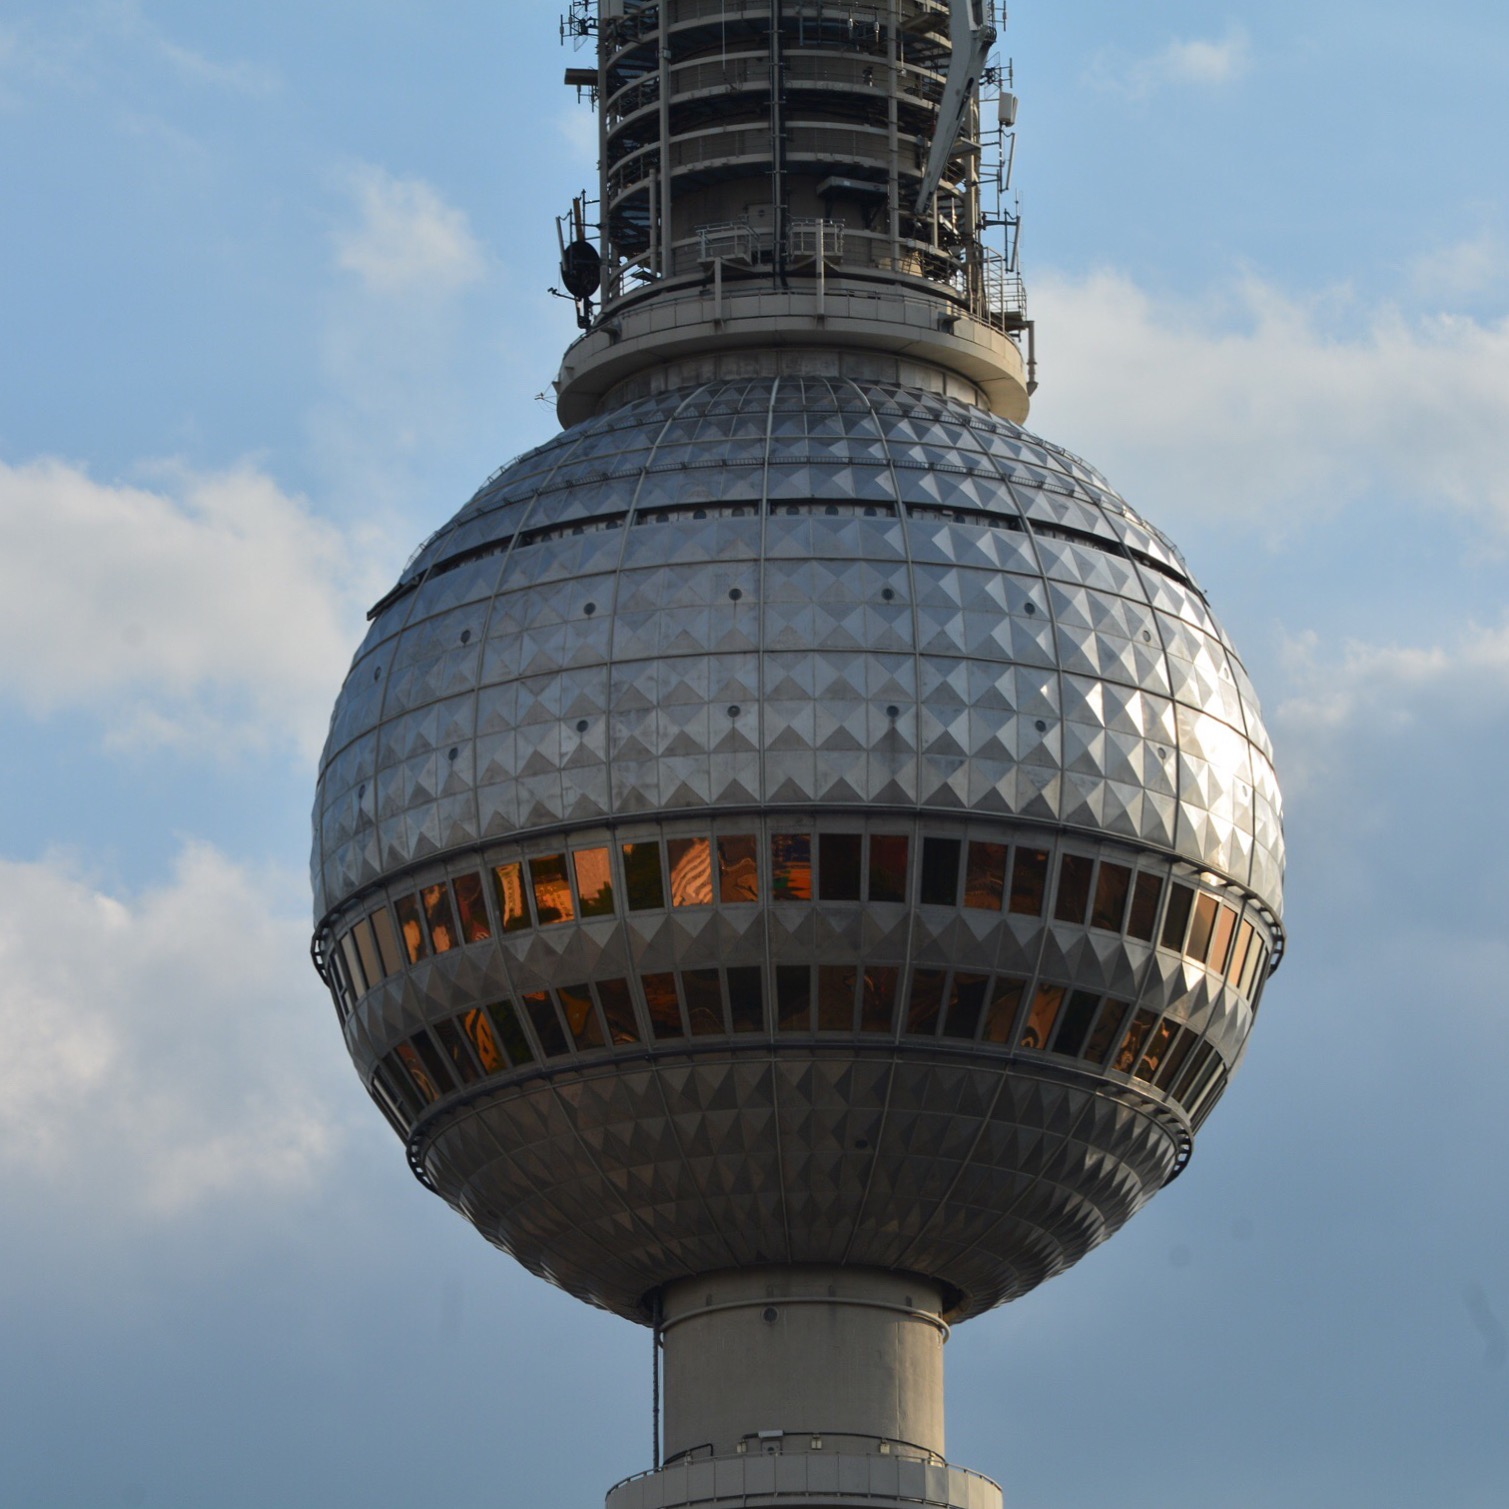 Berlin's TV Tower view from a high building